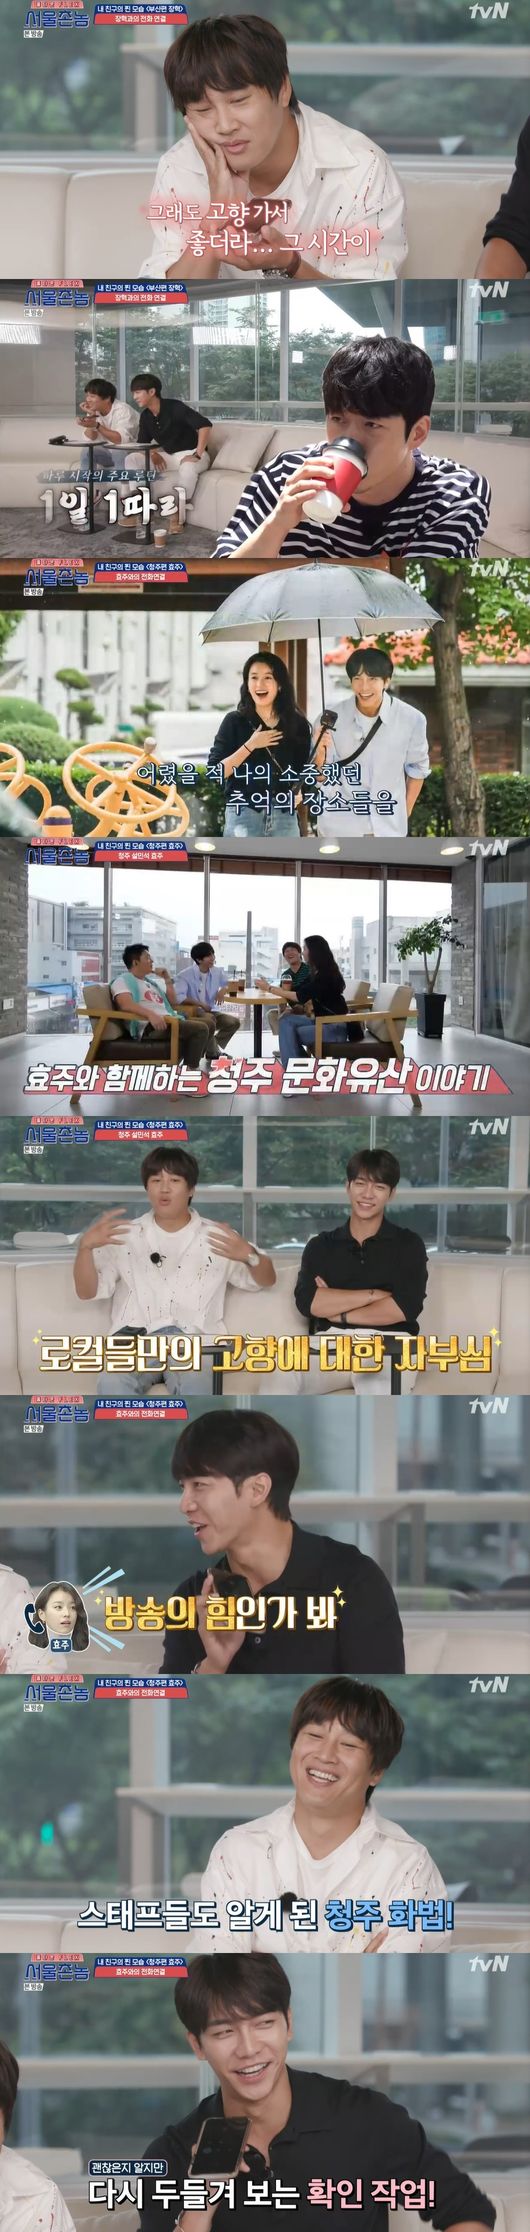 Hometown Flex  ended season one with a phone connection with Han Hyo-joo and Jang HyukJTBC entertainment Hometown Flex , which was broadcast on the 20th, was broadcasted.On the day, Unbroadcasted Highlights of the Day was released.Lee Seung-gi said, I had a record-breaking broadcast in 17 years of broadcasting history. Almost half of it would have been broadcast, and there were some things that were edited in time.Then, the special part of the rice flour was released, and the picture was drawn at a cafe operated by Friend of Jang Hyuk, which was edited in Youngdo.The production team said, Busan people will go on a I want to see Friend to confirm this, and Busan will call the acquaintance and say that the person who called the most will win.From the phone, Ssamdi led, but the time was running out, eventually winning by Jang Hyuk, as the cafe owner Friend was next to Baro.At this time, Lee Si-eons cousin arrived, and Lee Si-eon ran first in a reversal; Ssamdi recaptured the top spot again, turning Baro in a turn as many acquaintances came at once.Finally, Ssamdi became King of the Righteousness.Friends recommended Busan as a cheaper price than Seoul, and said, Busan is a hometown with Oiso Boys and real friends. Lets drink until we are 90 years old.The story of the poor performance was drawn on the memorable tour of Cheongju Broadcasting, starring Han Hyo-joo.Han Hyo-joo said, I have never cried out on the air, but it is a strange and strange feeling. It is a space with time and memories of my childhood.In the meantime, Han Hyo-joo introduced the Cheongju Broadcasting Cultural Heritage and conveyed his love for his hometown, and the members recalled, The pride of local hometowns was also shining.Lee Seung-gi and Yunho were also seen on the Gwangju side, remembering their days together: the moments they saw a new look through Friends: the time they had seen steam in their hometowns.Above all, Jang Hyuk has been calling Han Hyo-joo, especially Han Hyo-joo, I was so impressed by the feelings I met at Cheongju Broadcasting, he said. I am grateful that the memories are made like an album.Hometown Flex  captures the broadcast screen